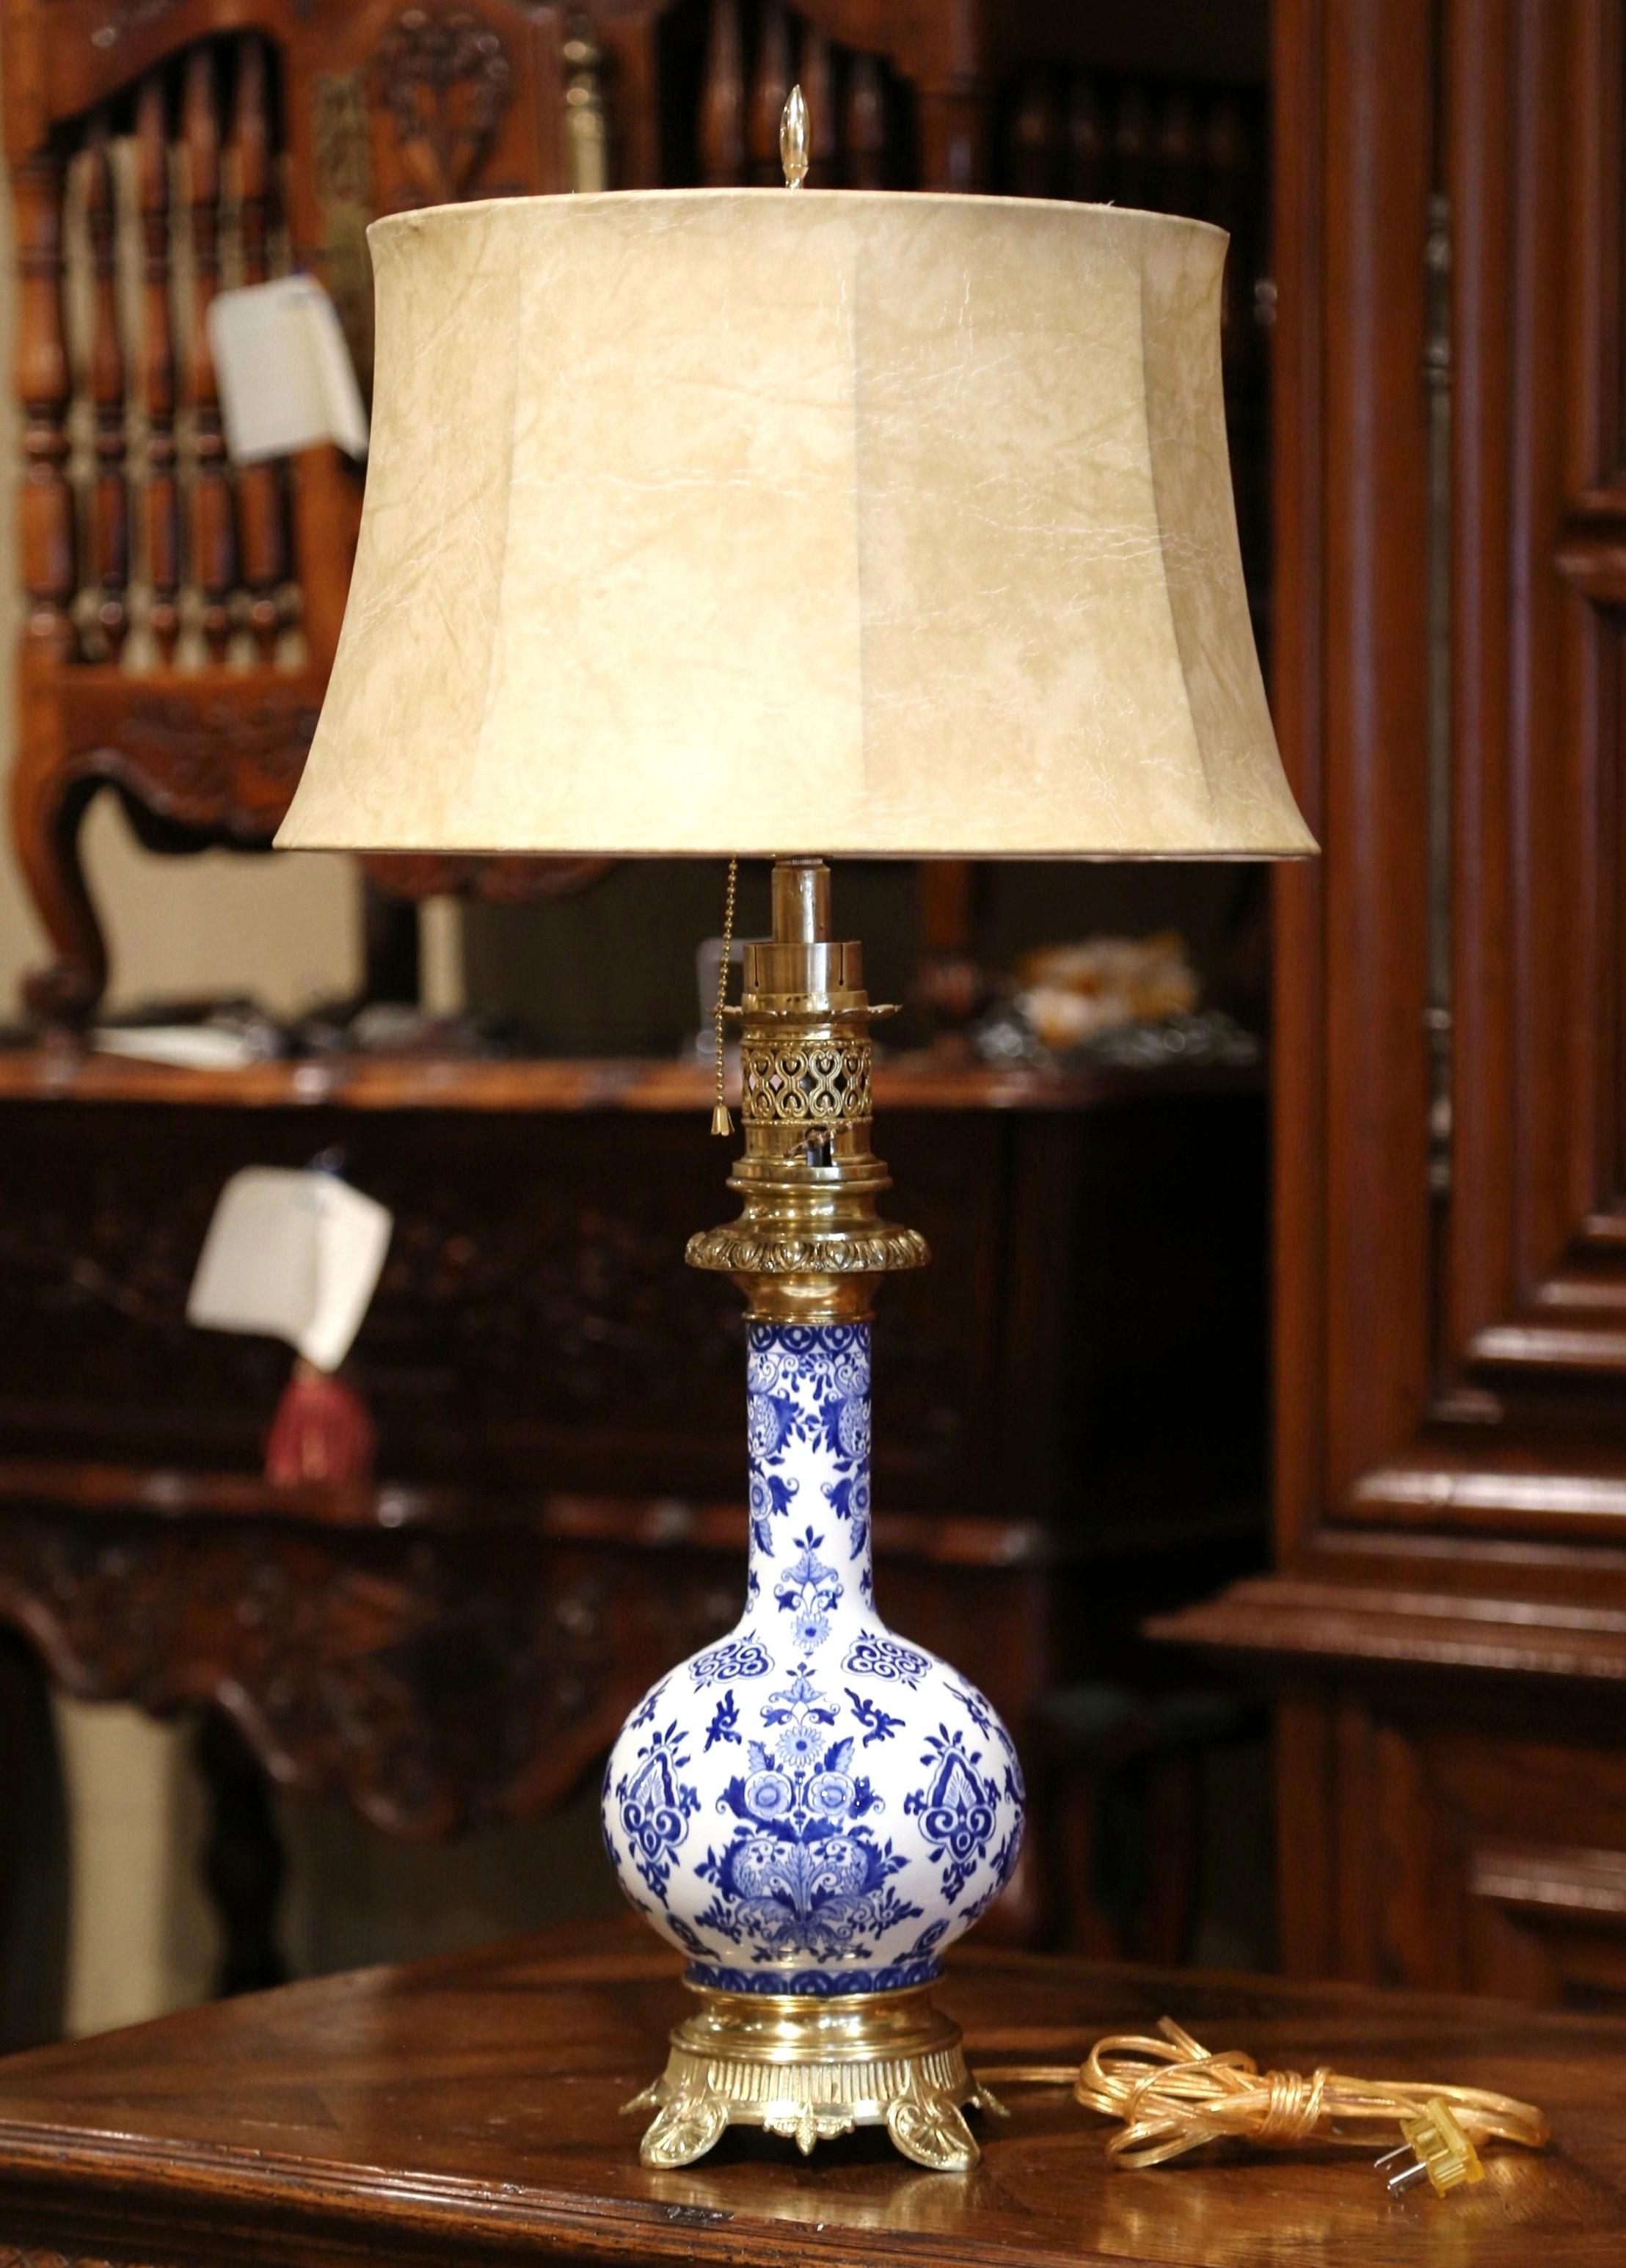 This elegant antique oil lamp was converted into a table lamp. Crafted in France, circa 1880, the tall porcelain 